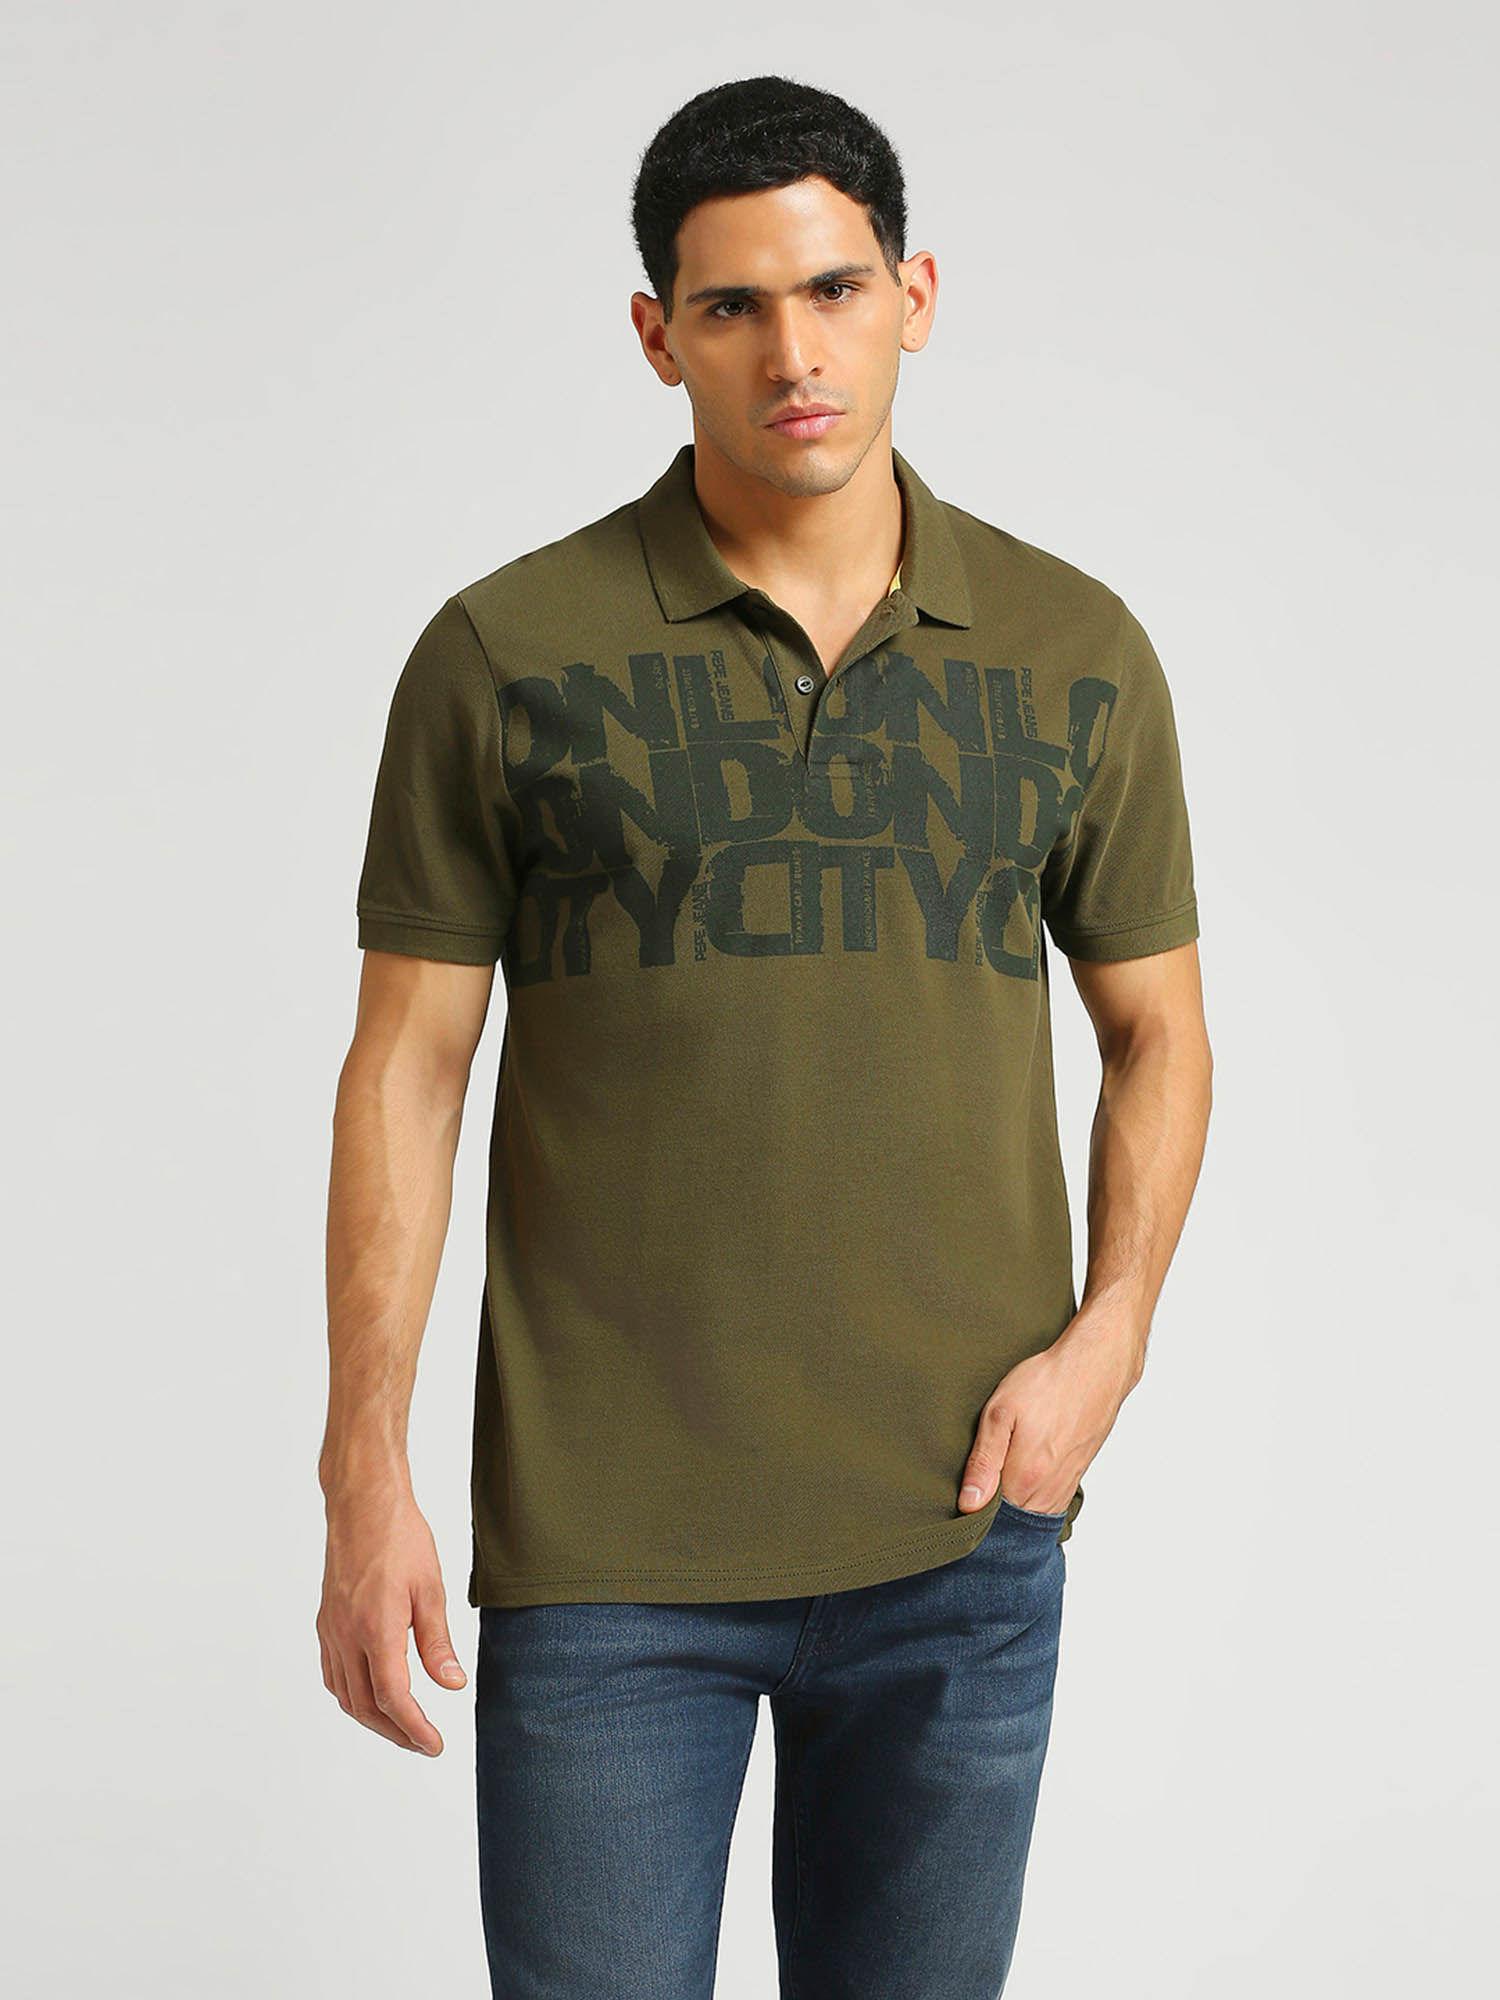 Olive Green Redcliff Typographic Placement Printed Polo T-Shirt